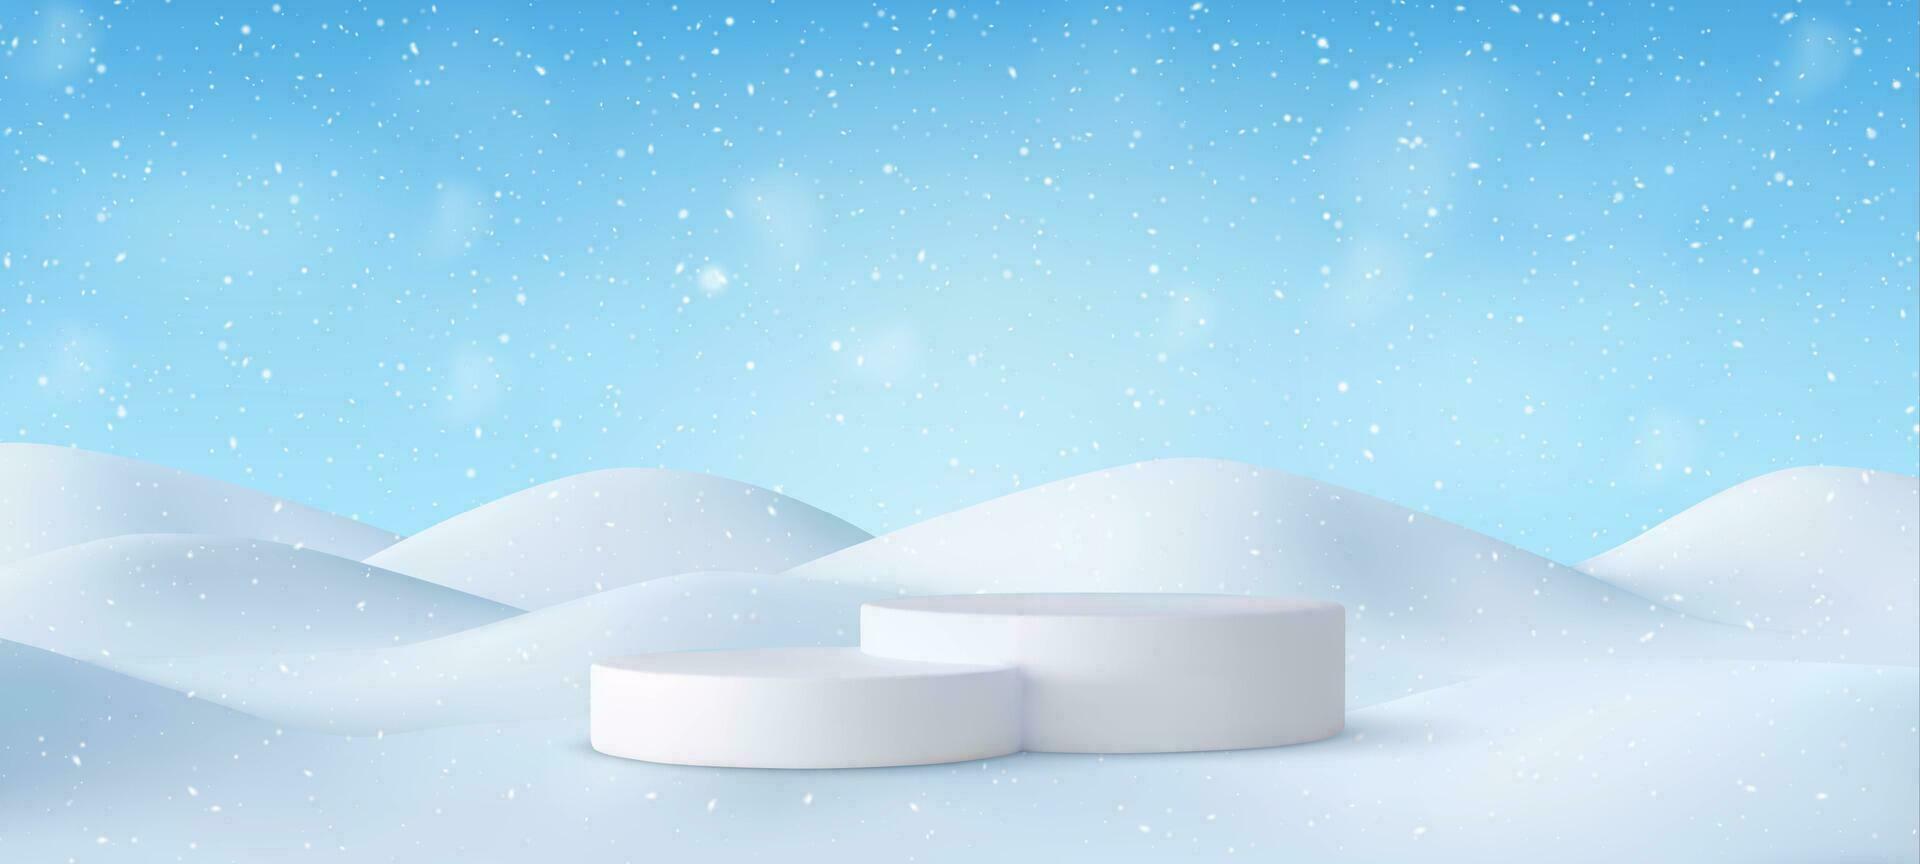 3d Christmas Winter landscape with snow drifts vector